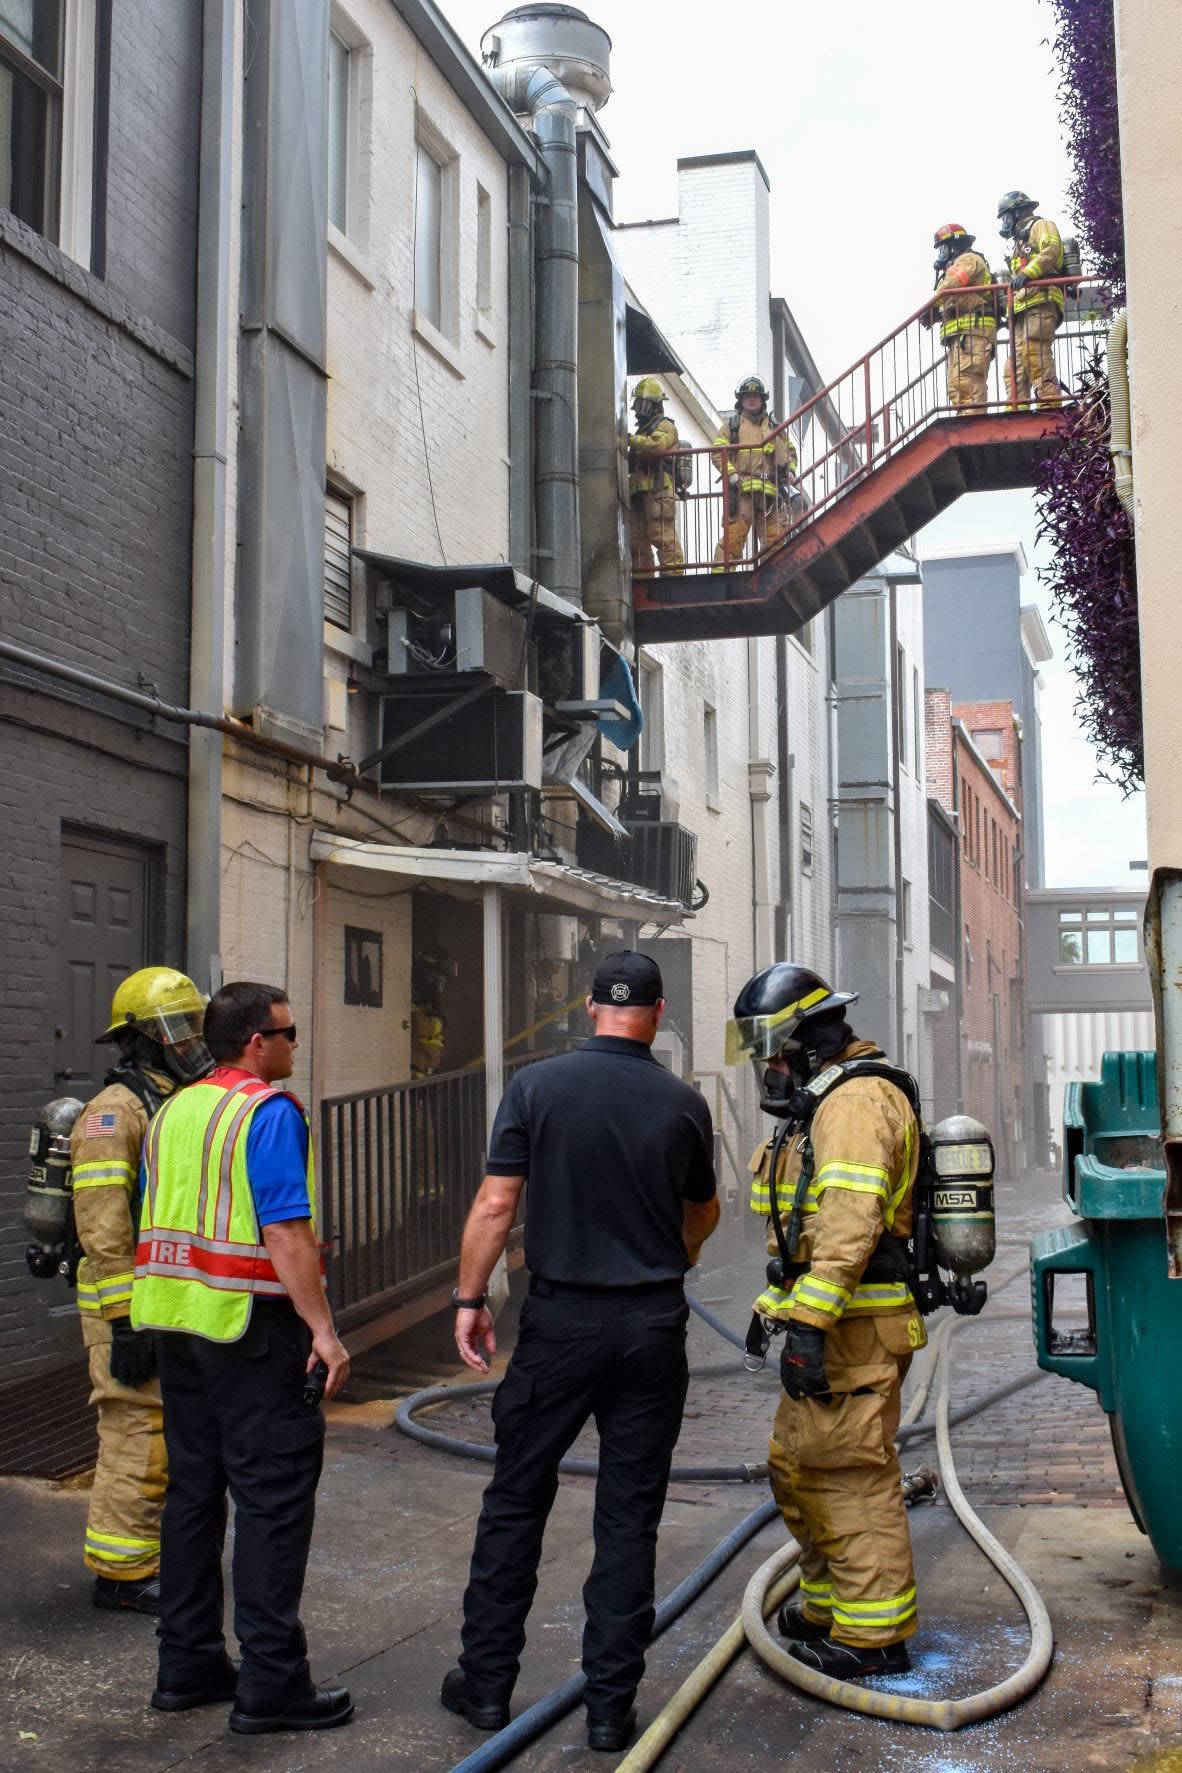 Lakeland Fire Department responded to calls of a structure fire at Harry's Seafood Bar and Grille around 3 p.m. Wednesday. Firefighter checked the building to ensure flames had not spread.